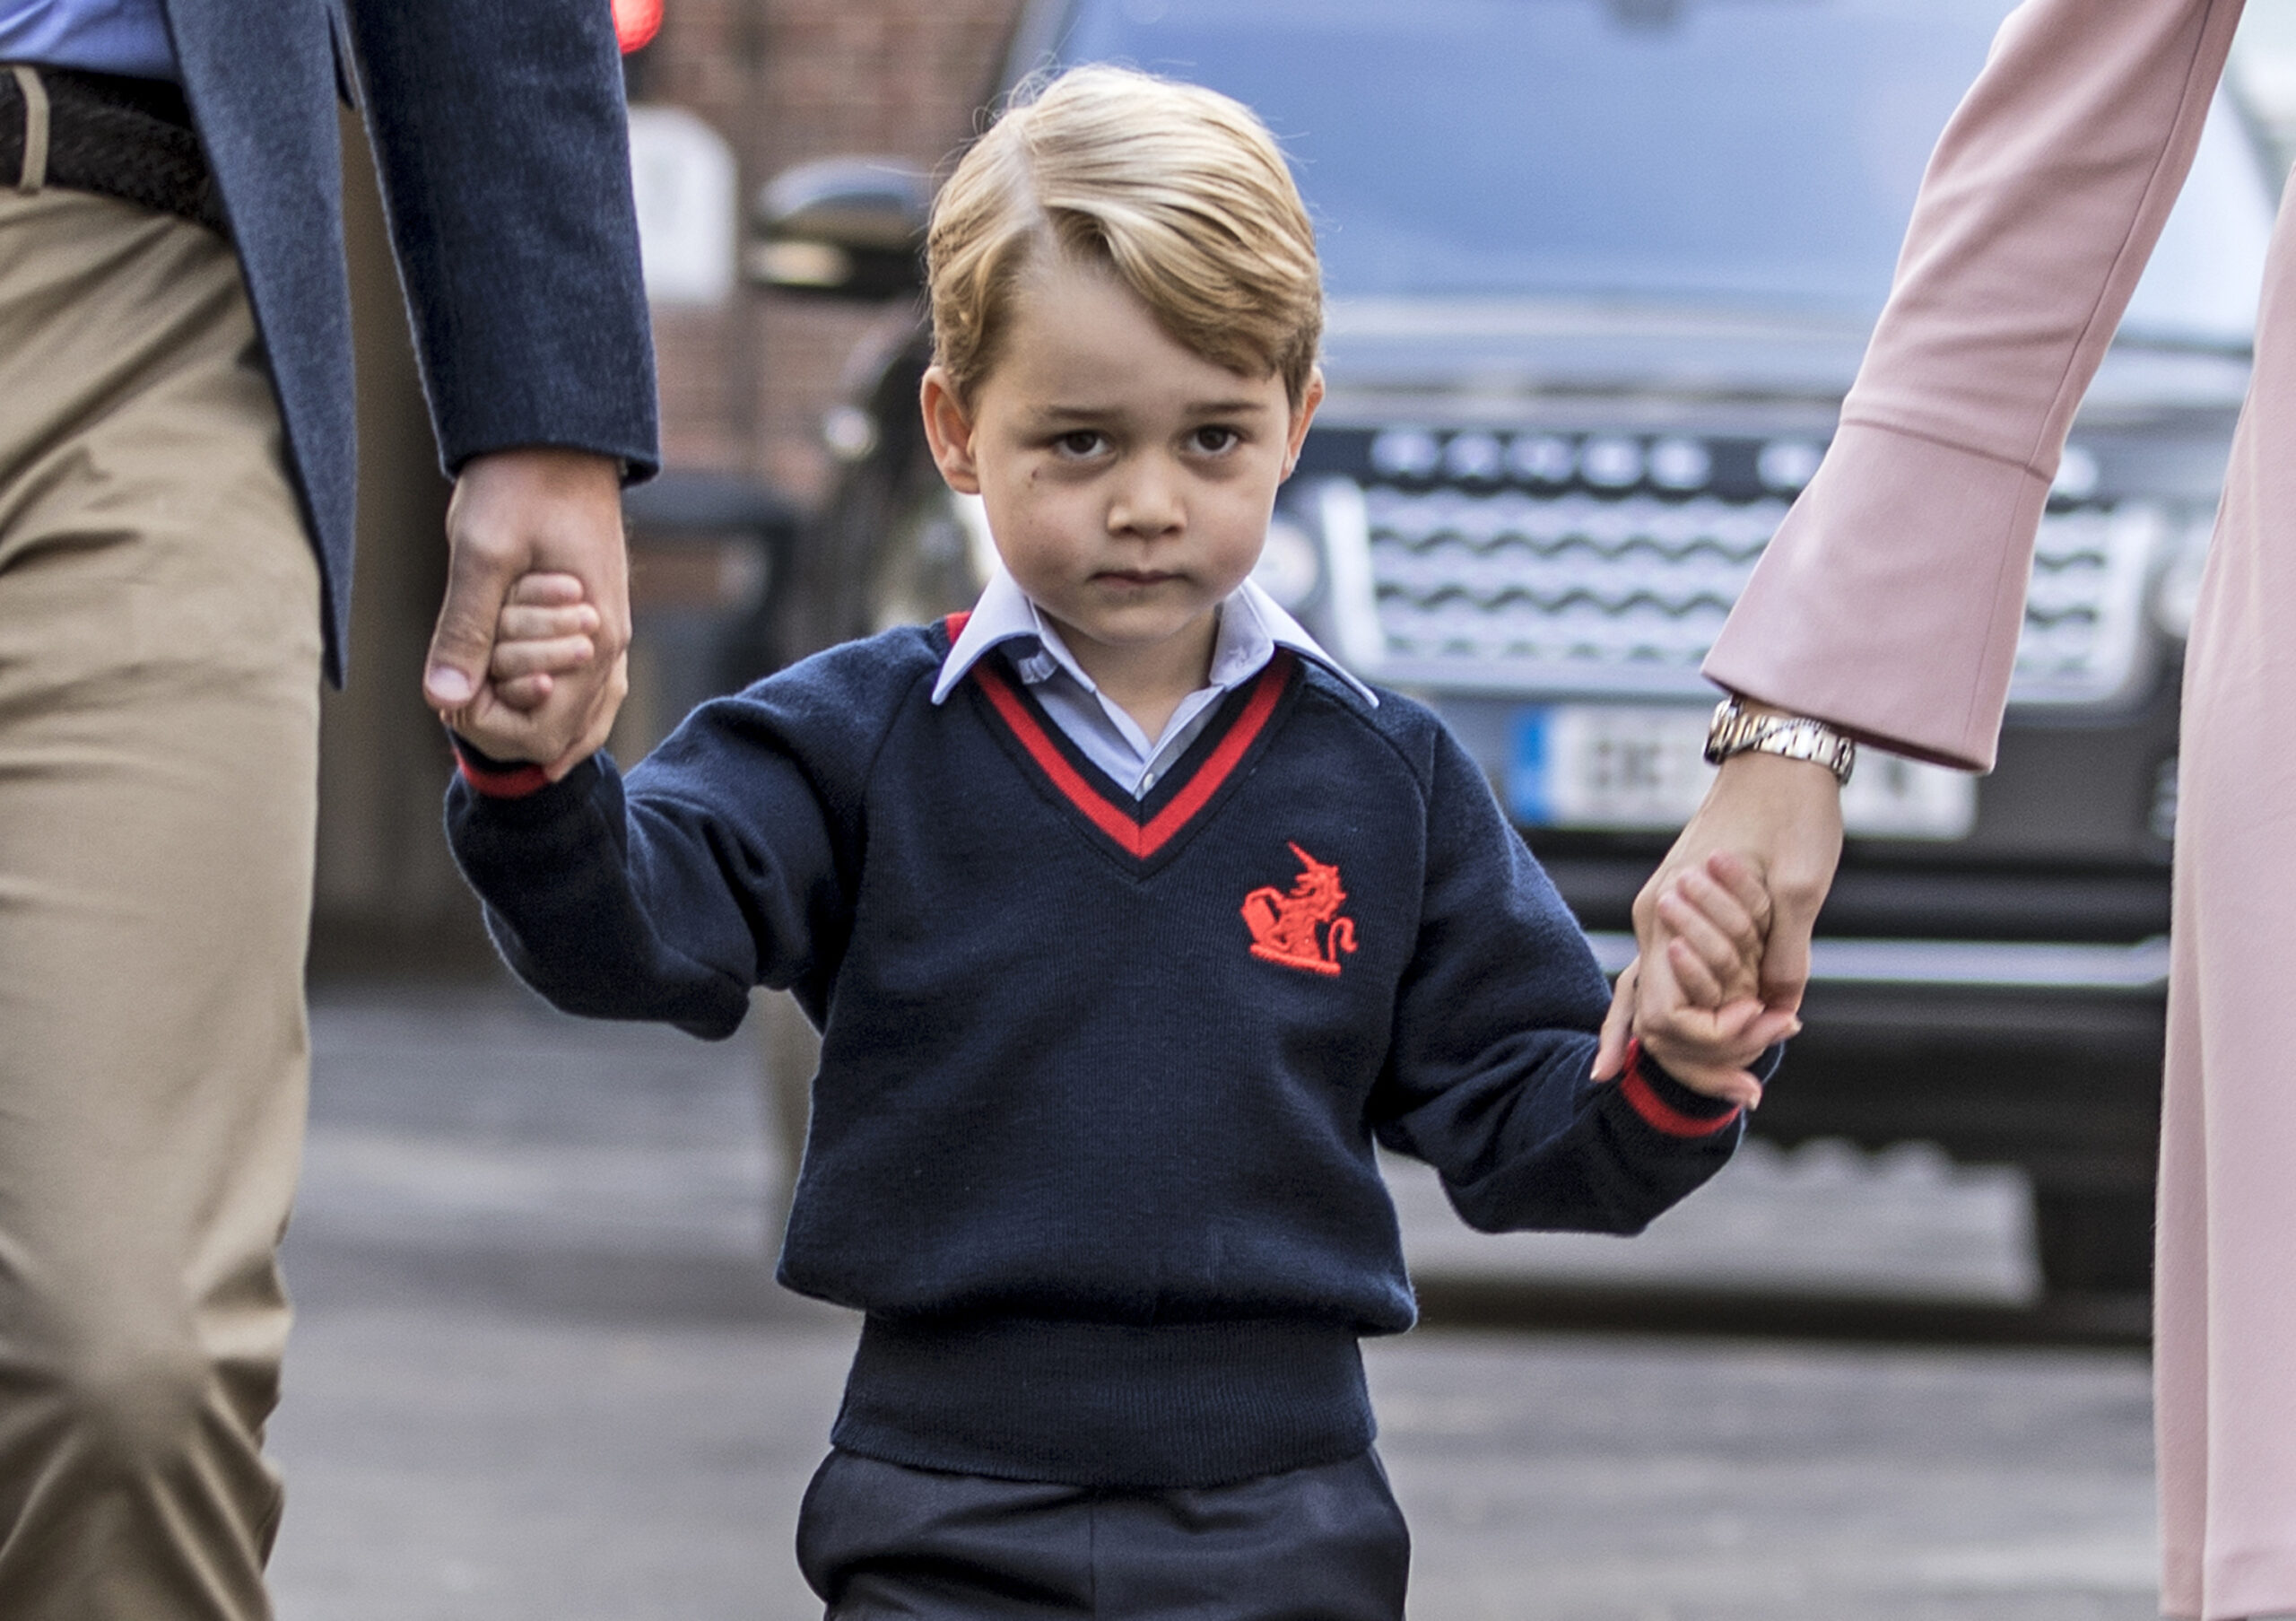 If you saw the lunch menu at Prince George’s school you’d want to go there too